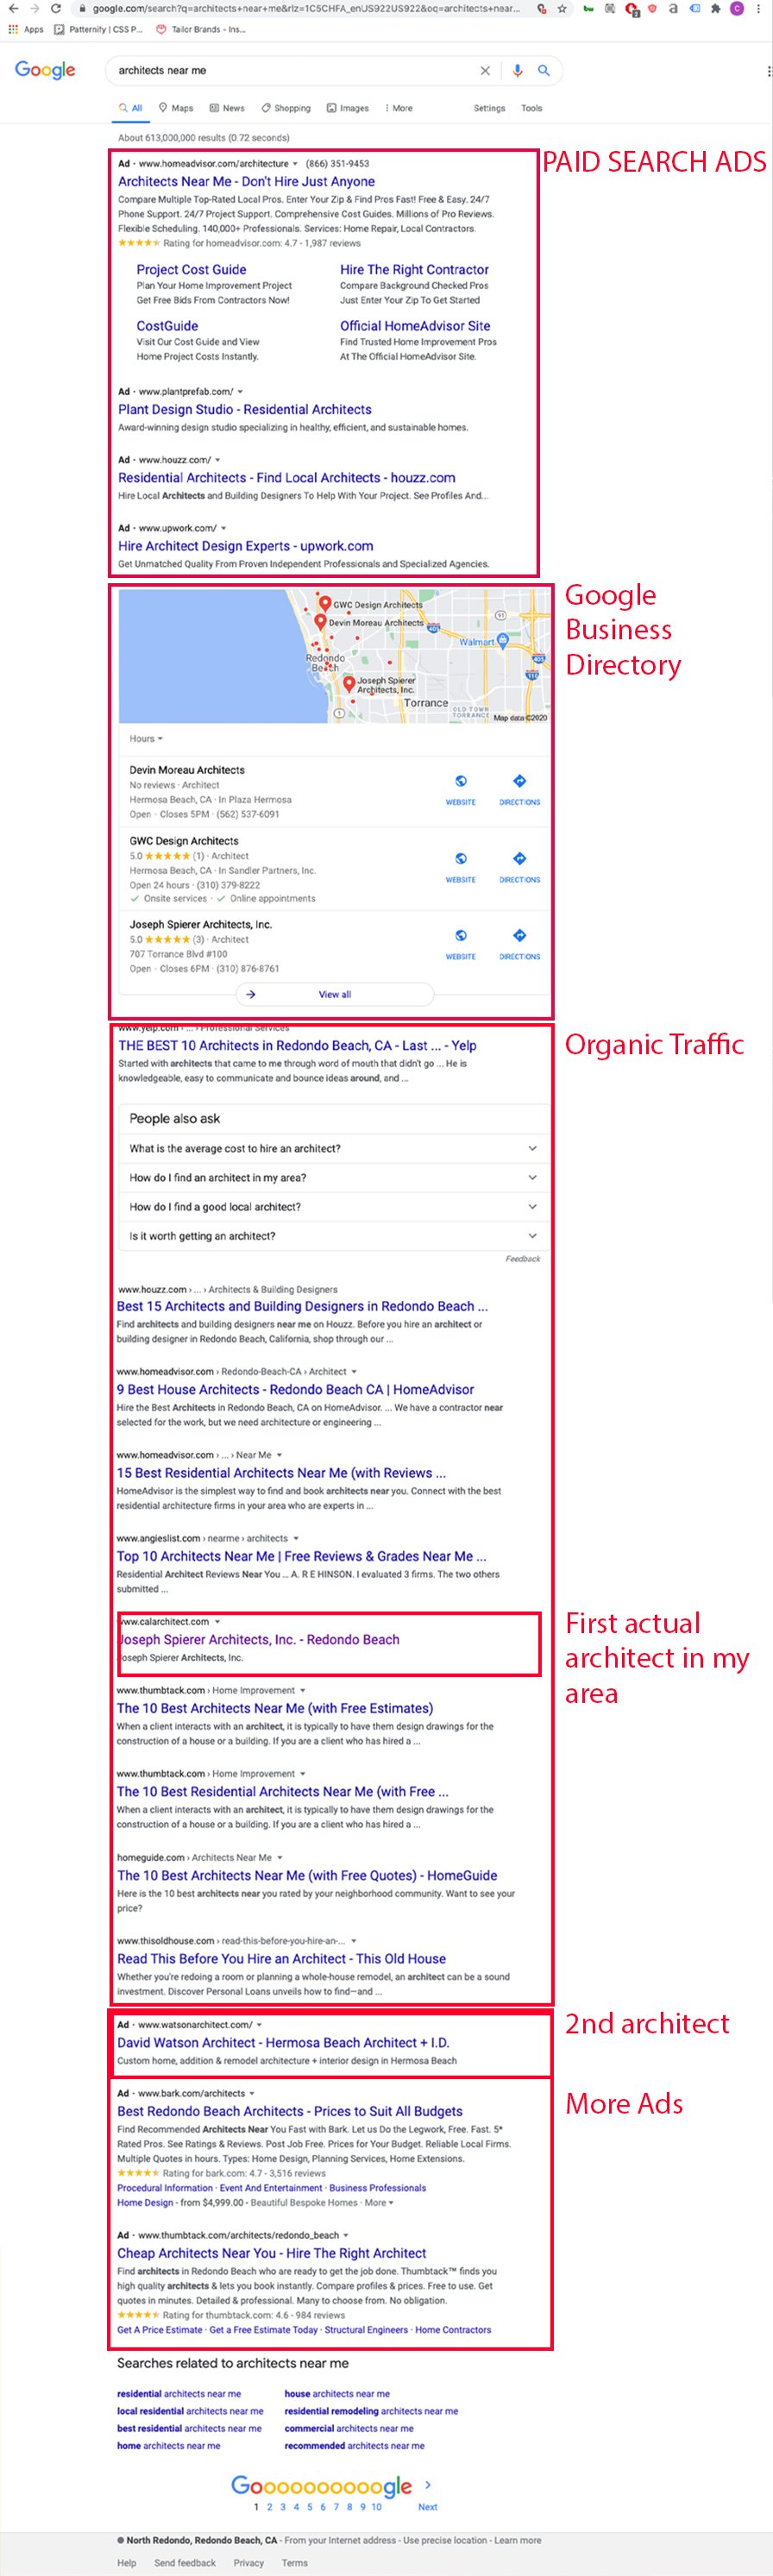 search engine marketing results for architects